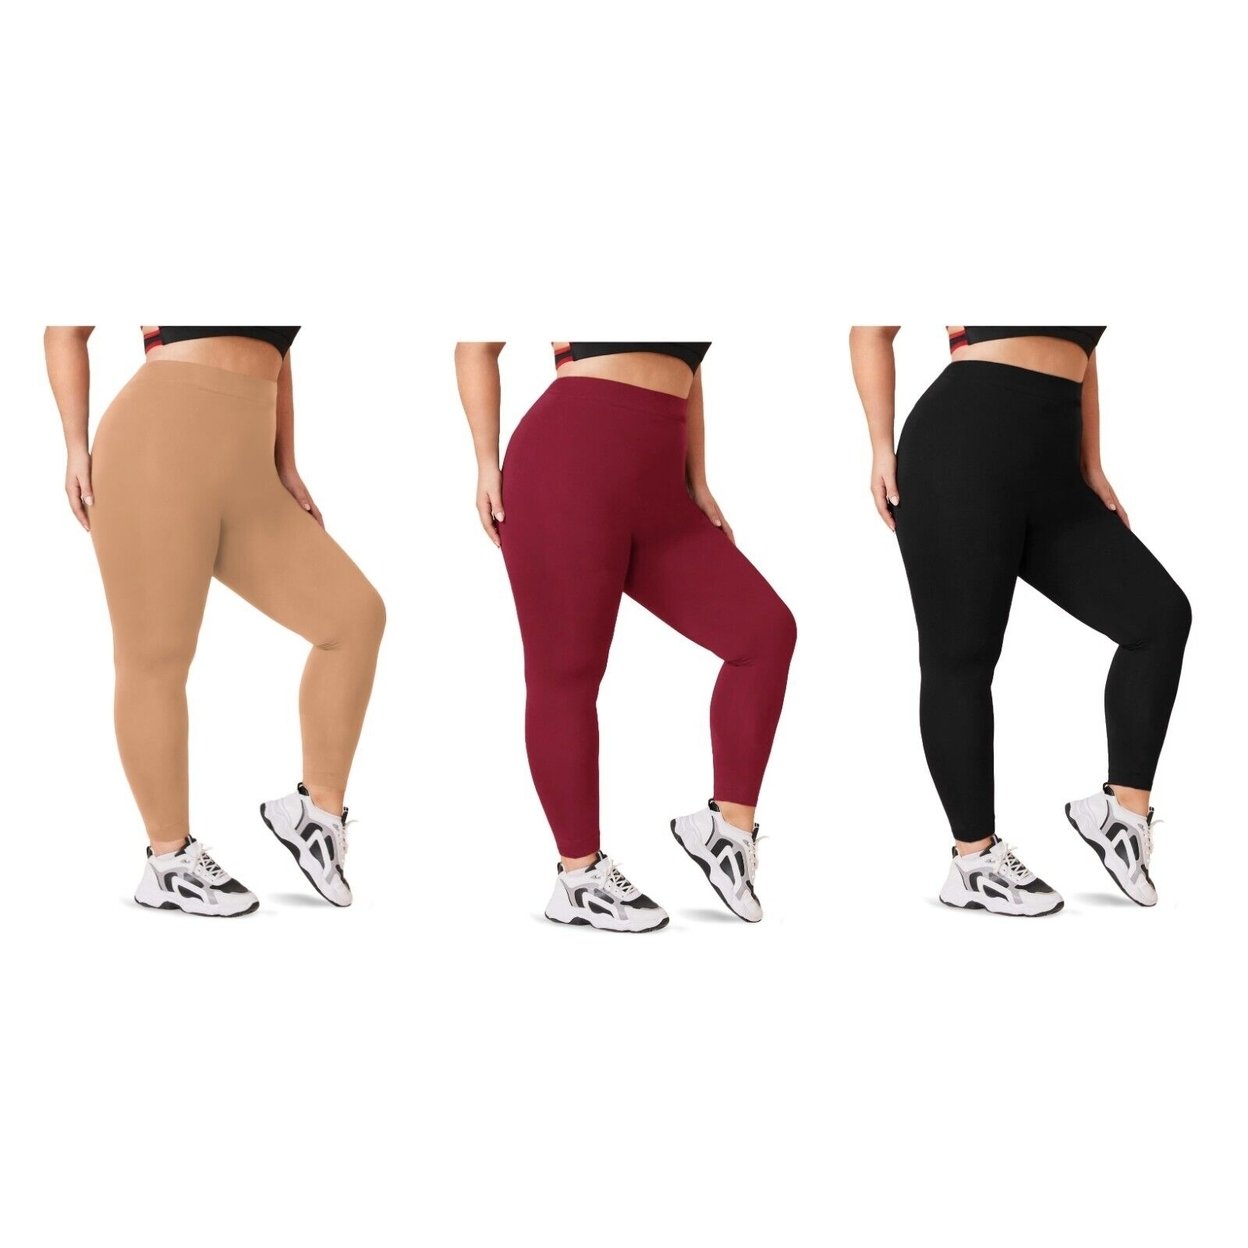 2-Pack: Women's Casual Ultra-Soft Smooth High Waisted Athletic Active Yoga Leggings Plus Size Available - Red & Black, 2x